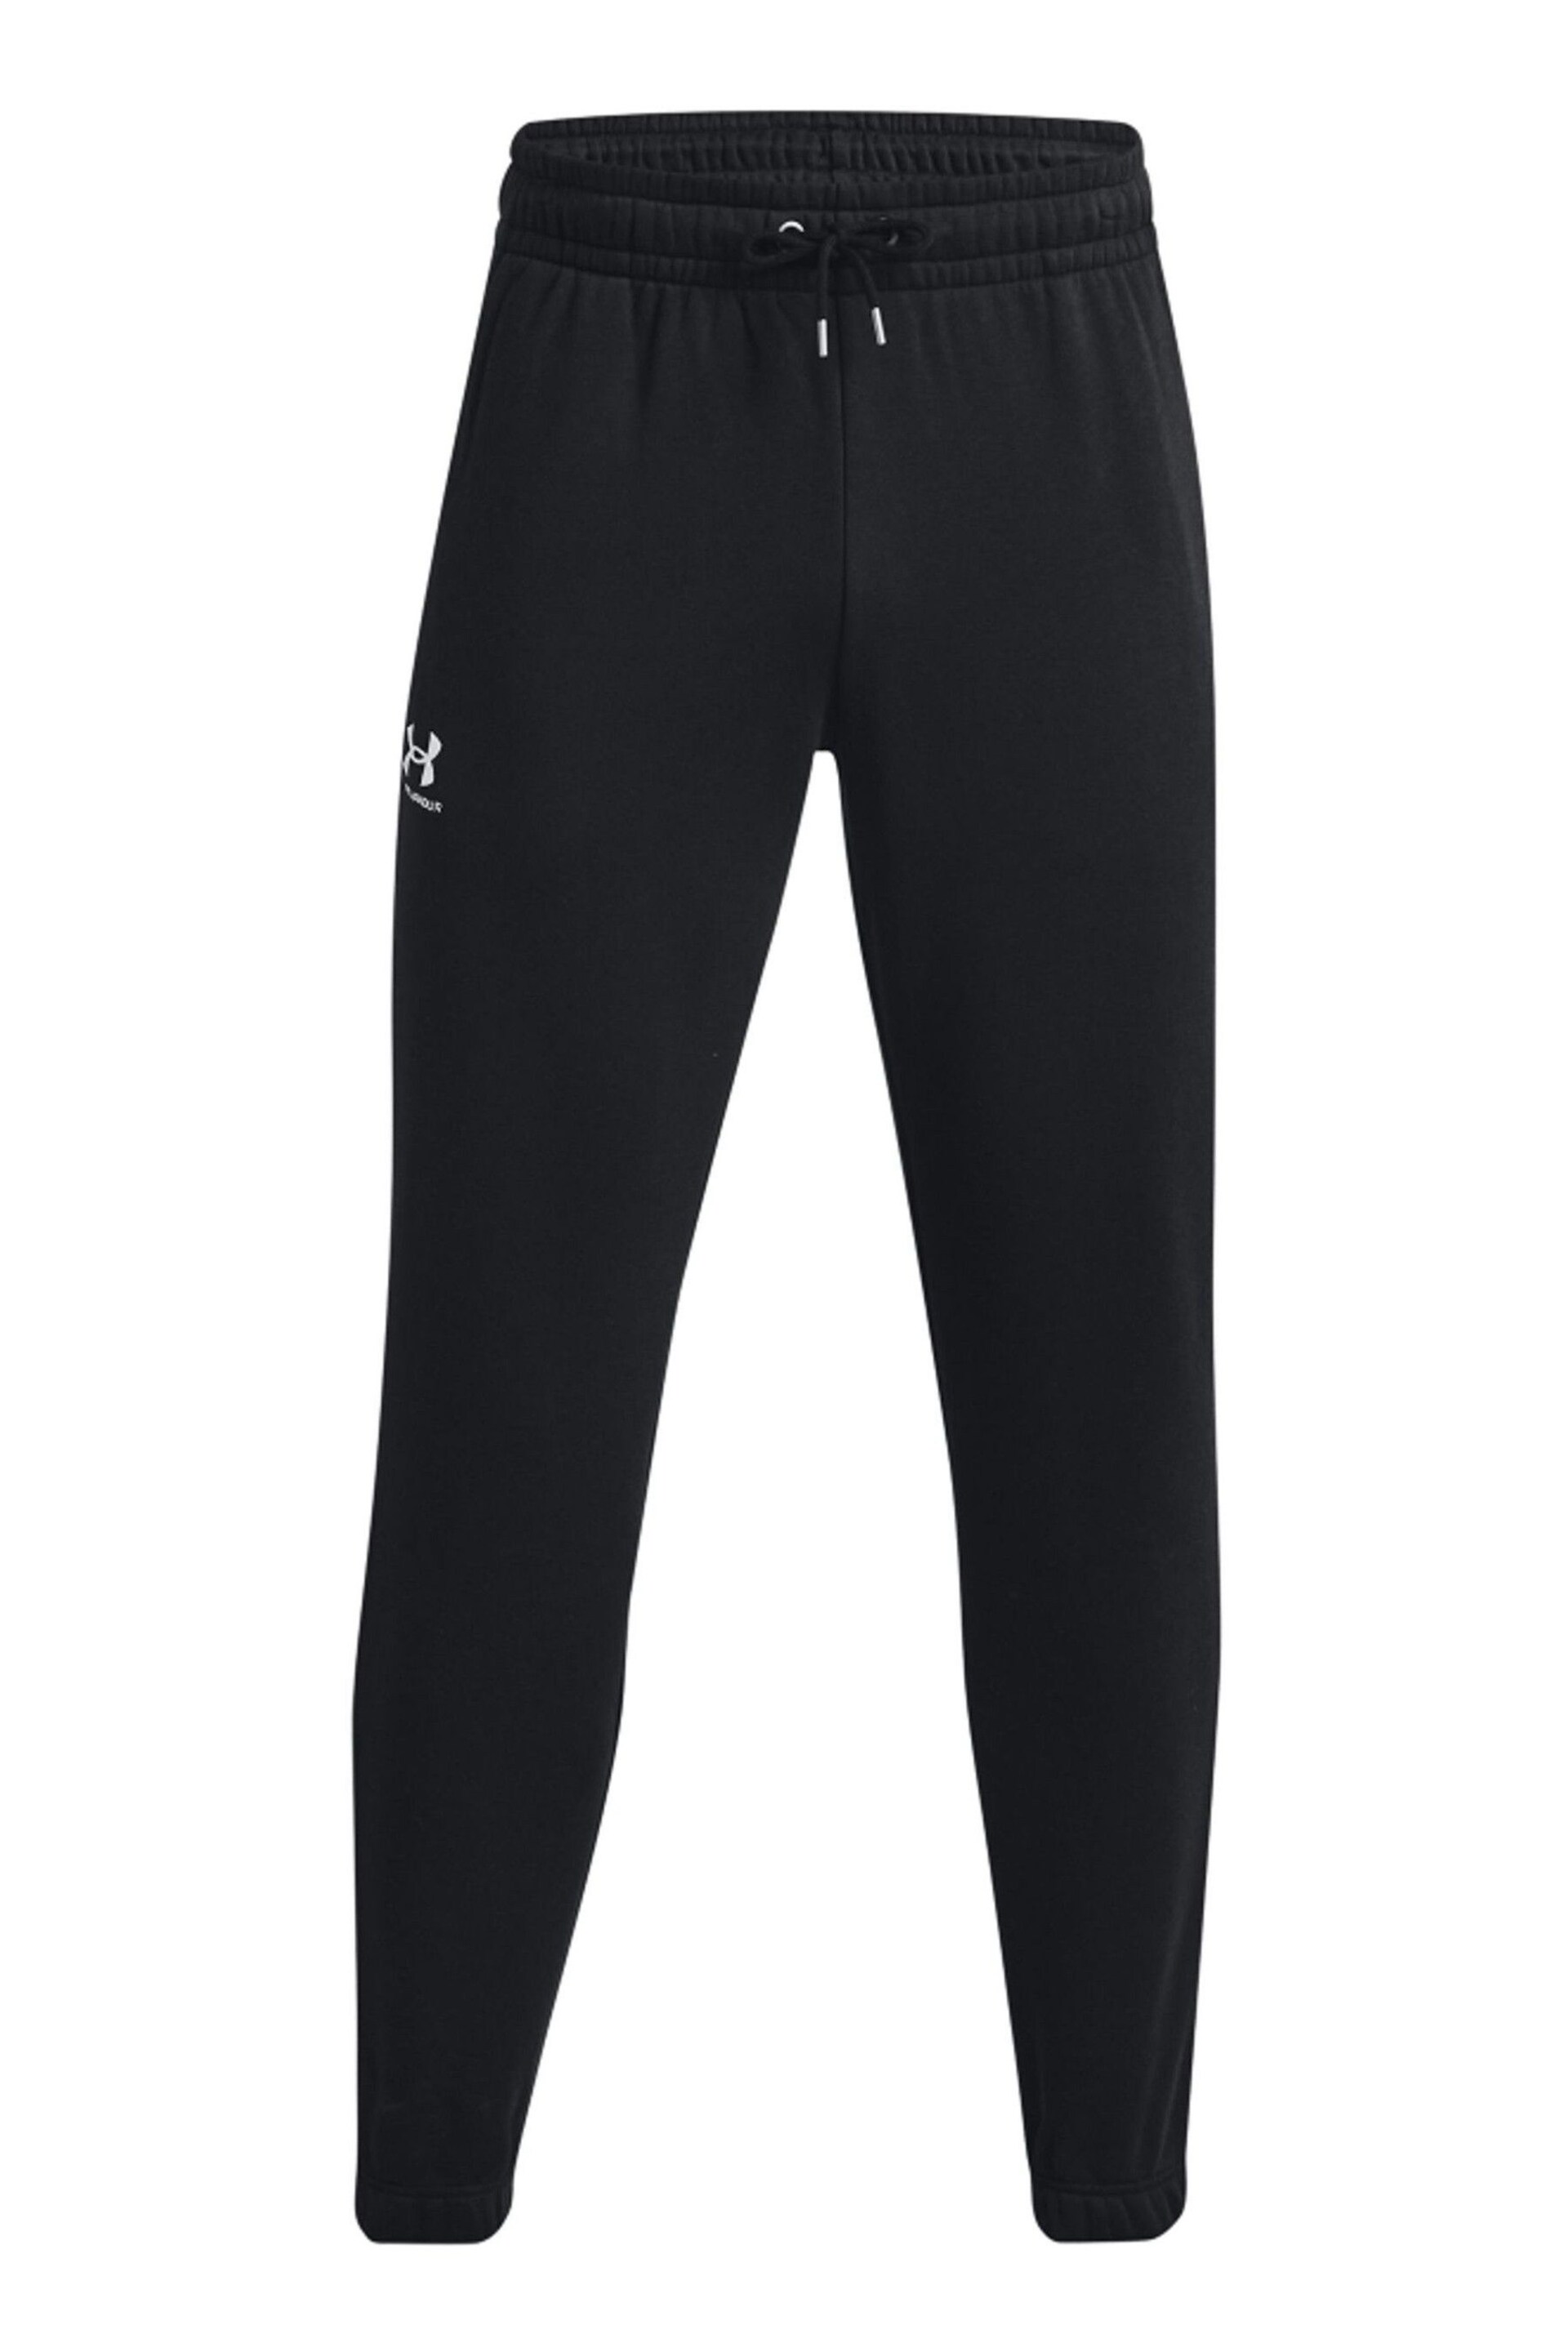 Under Armour Black Essential Joggers - Image 5 of 6